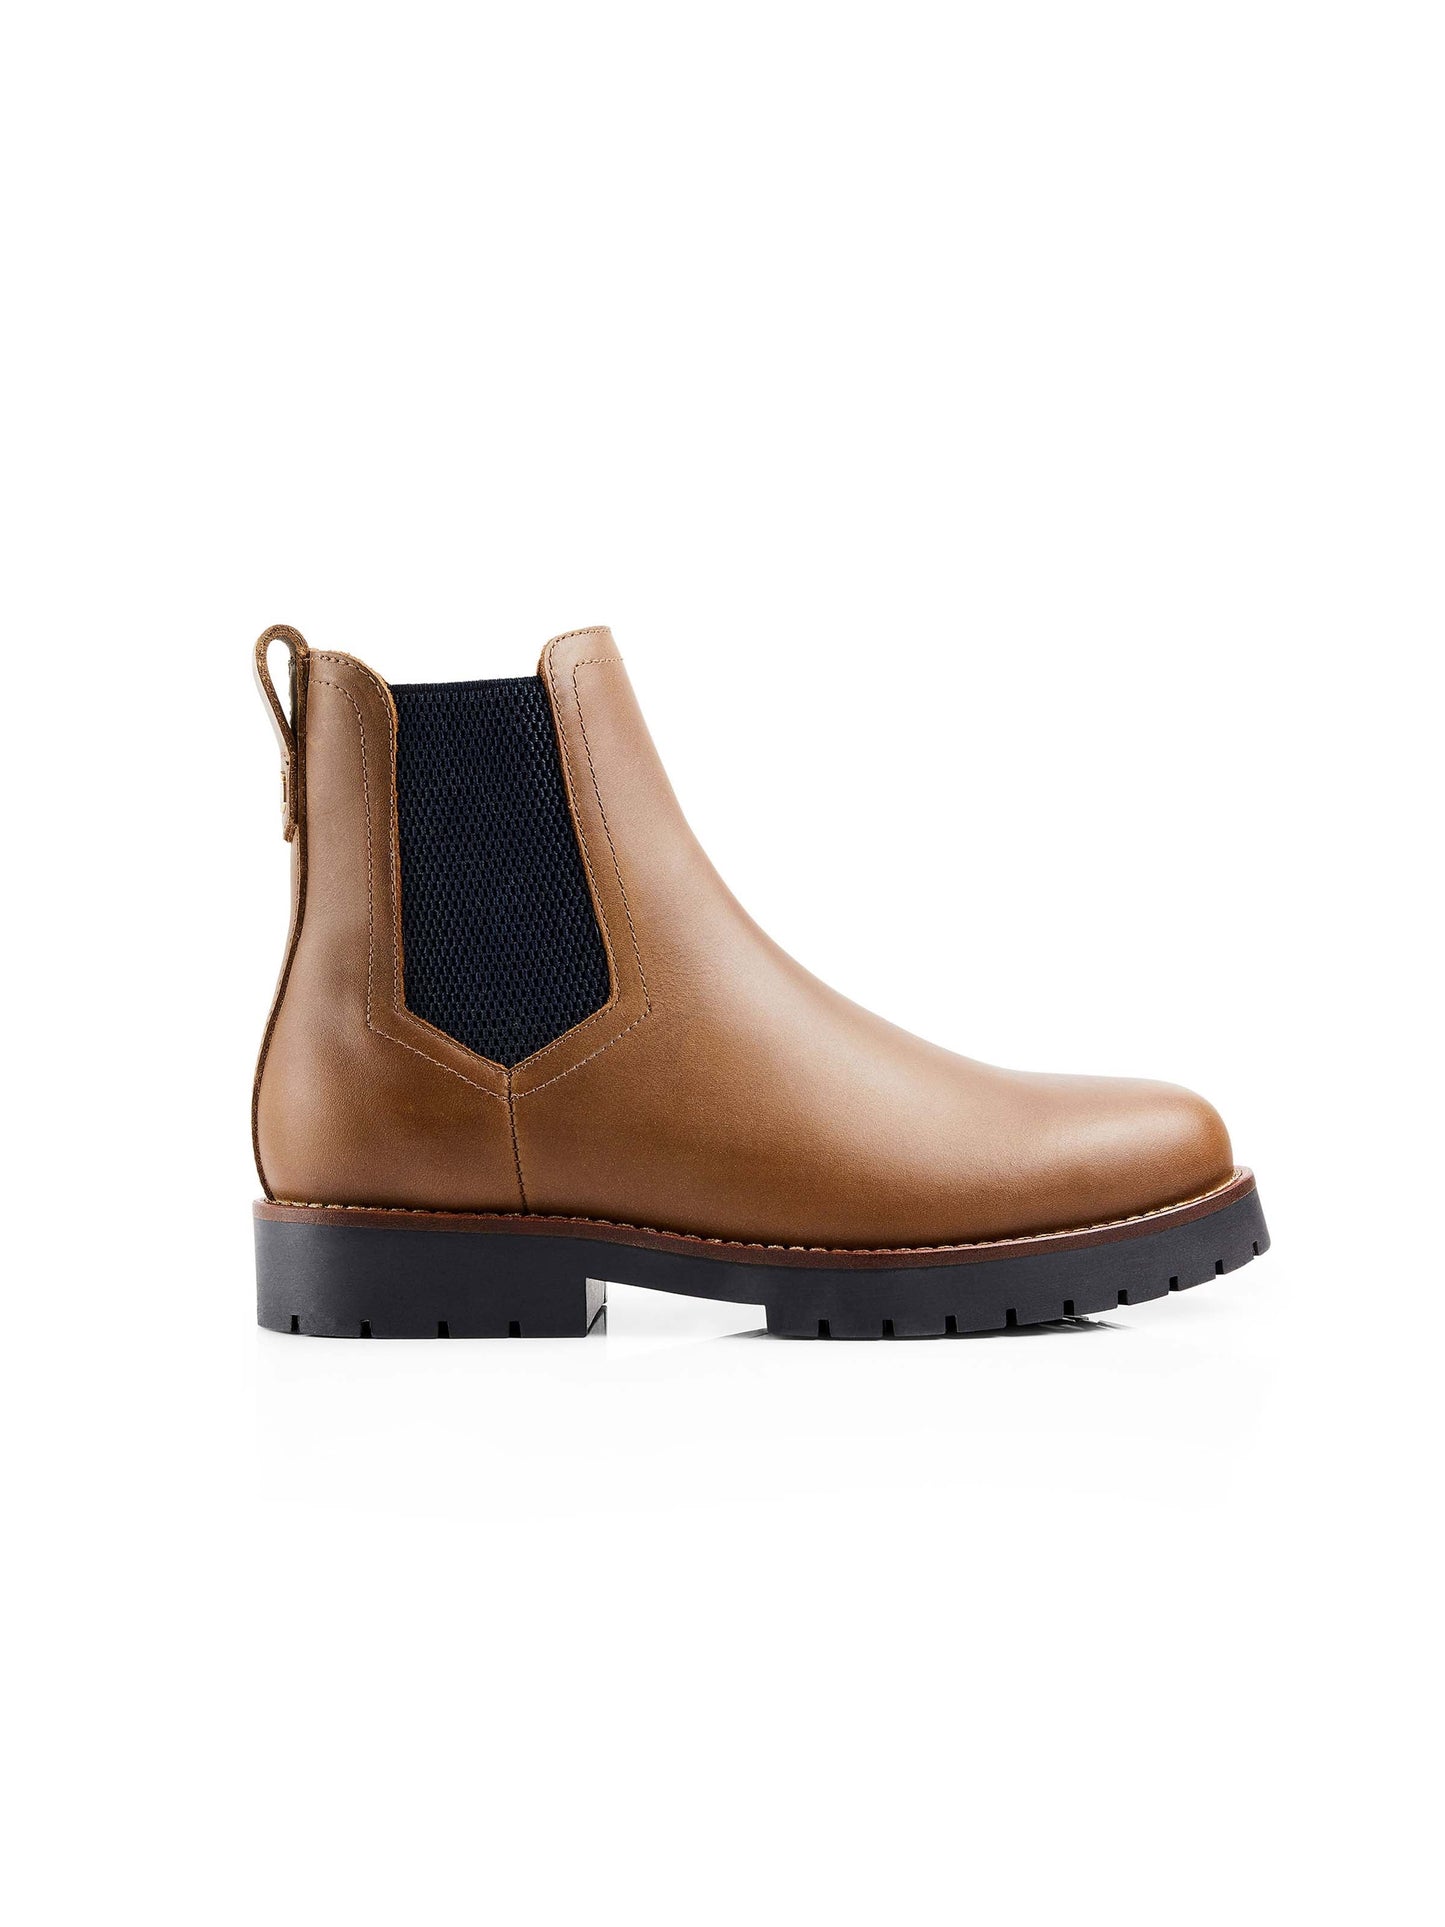 The Boudica Boot - Oak Leather